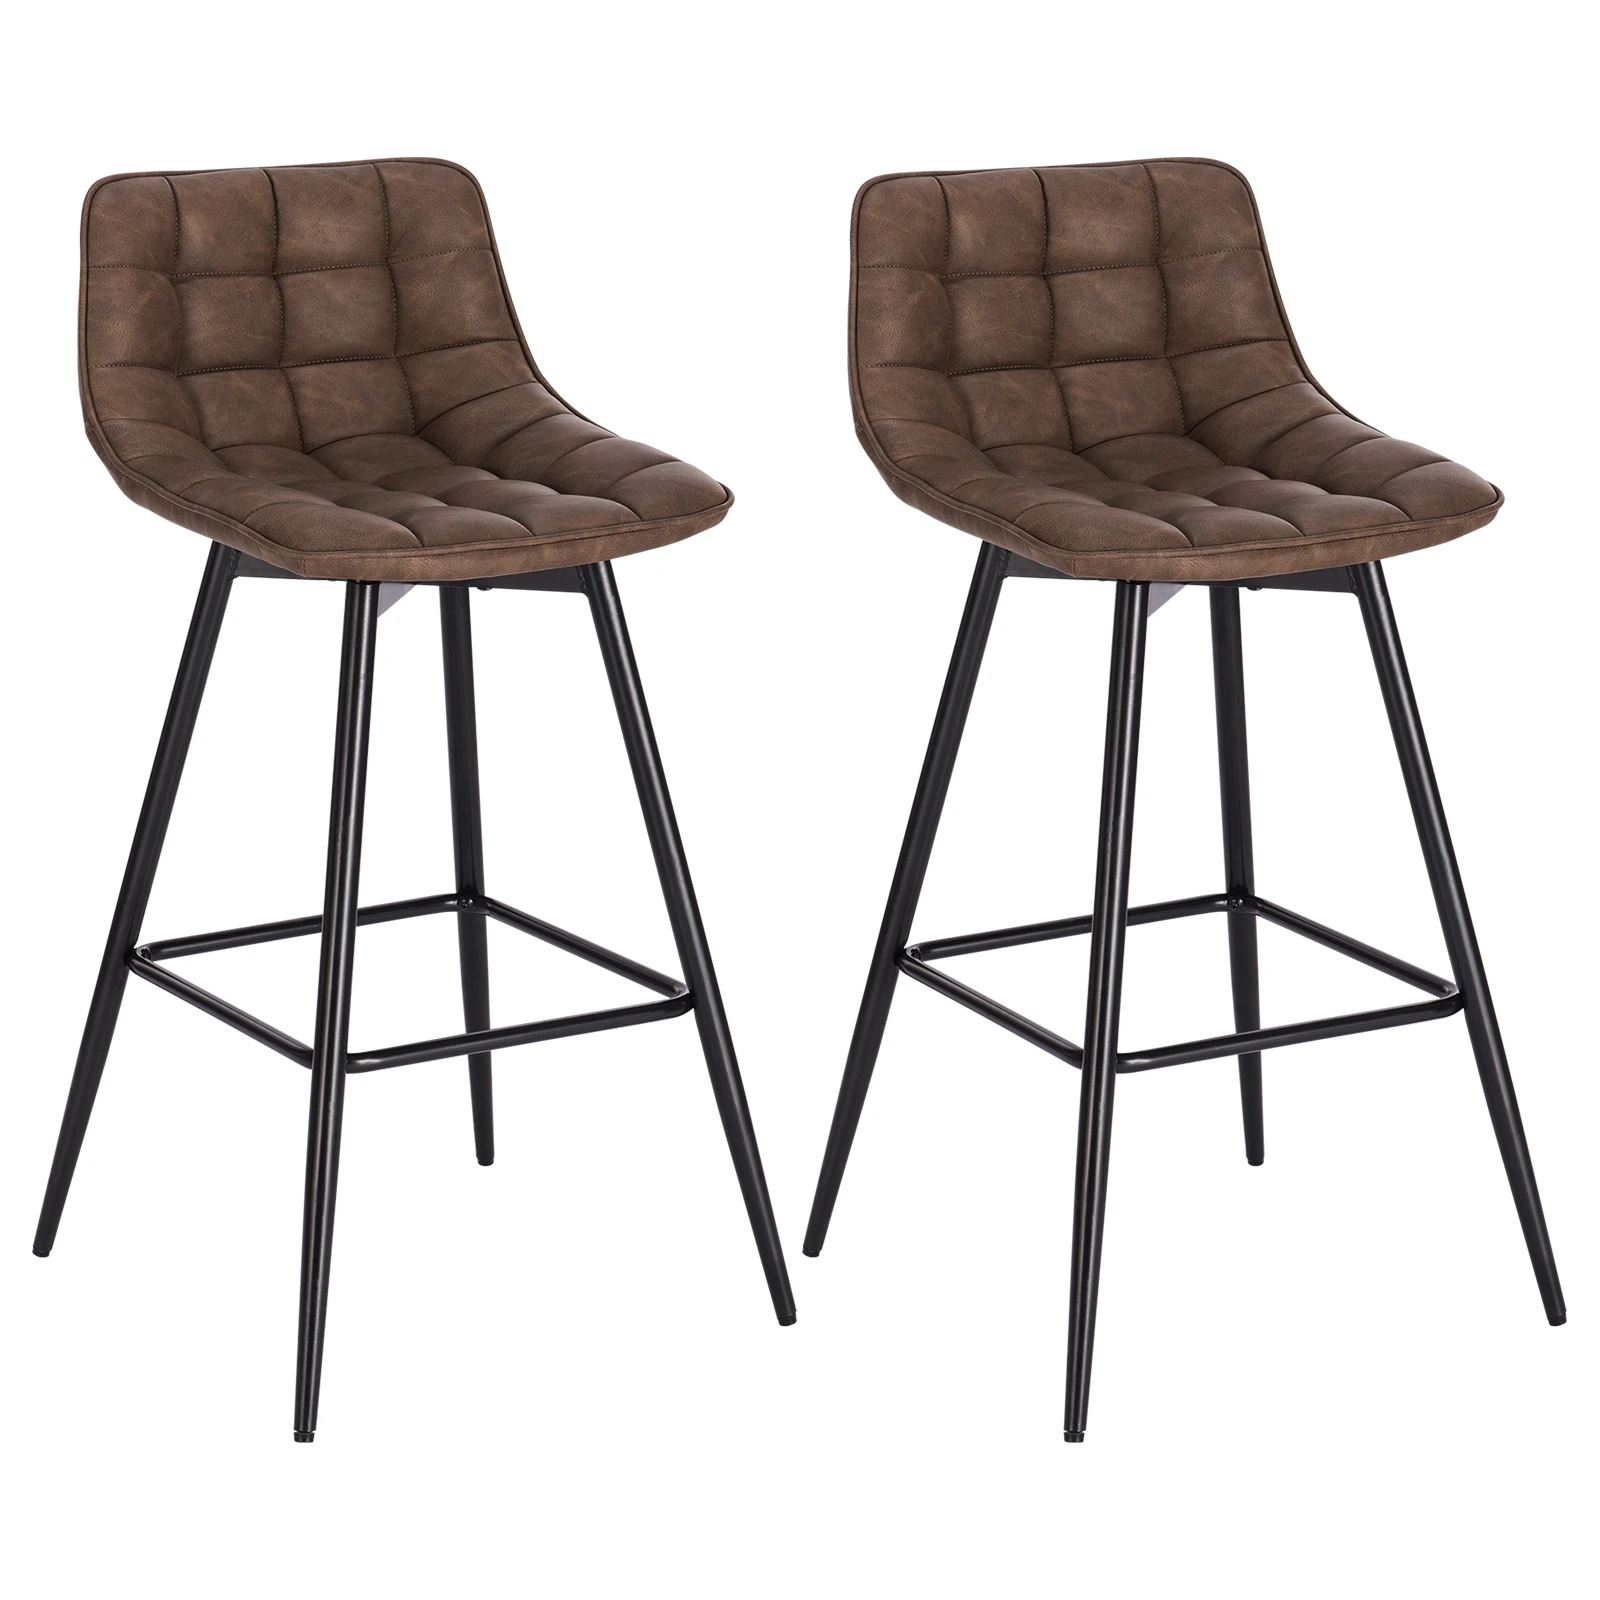 Woltu 2pcs/set Designer Bar Stool High Chair For Bar Bistro Leather/velvet  Seat With Footrest Metal Frame Household Bar Chairs - Bar Chairs -  AliExpress